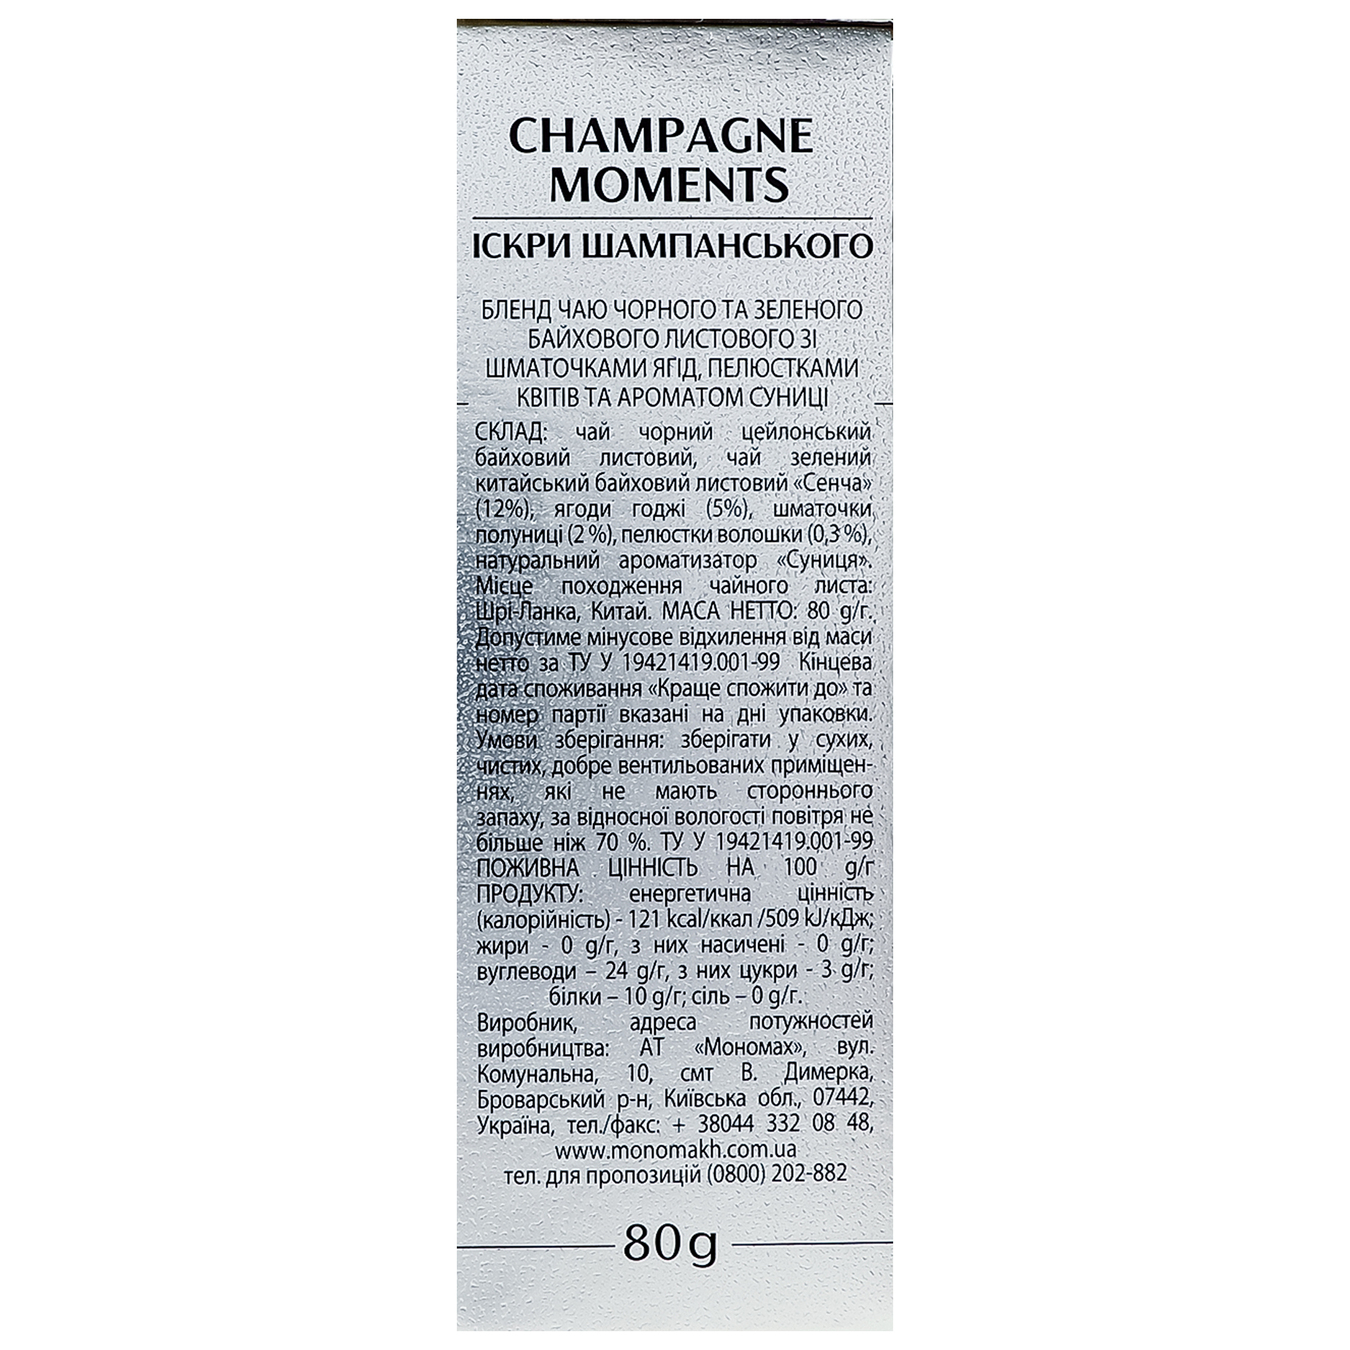 Black and green tea Monomakh Bryzky Champagne 80g 3